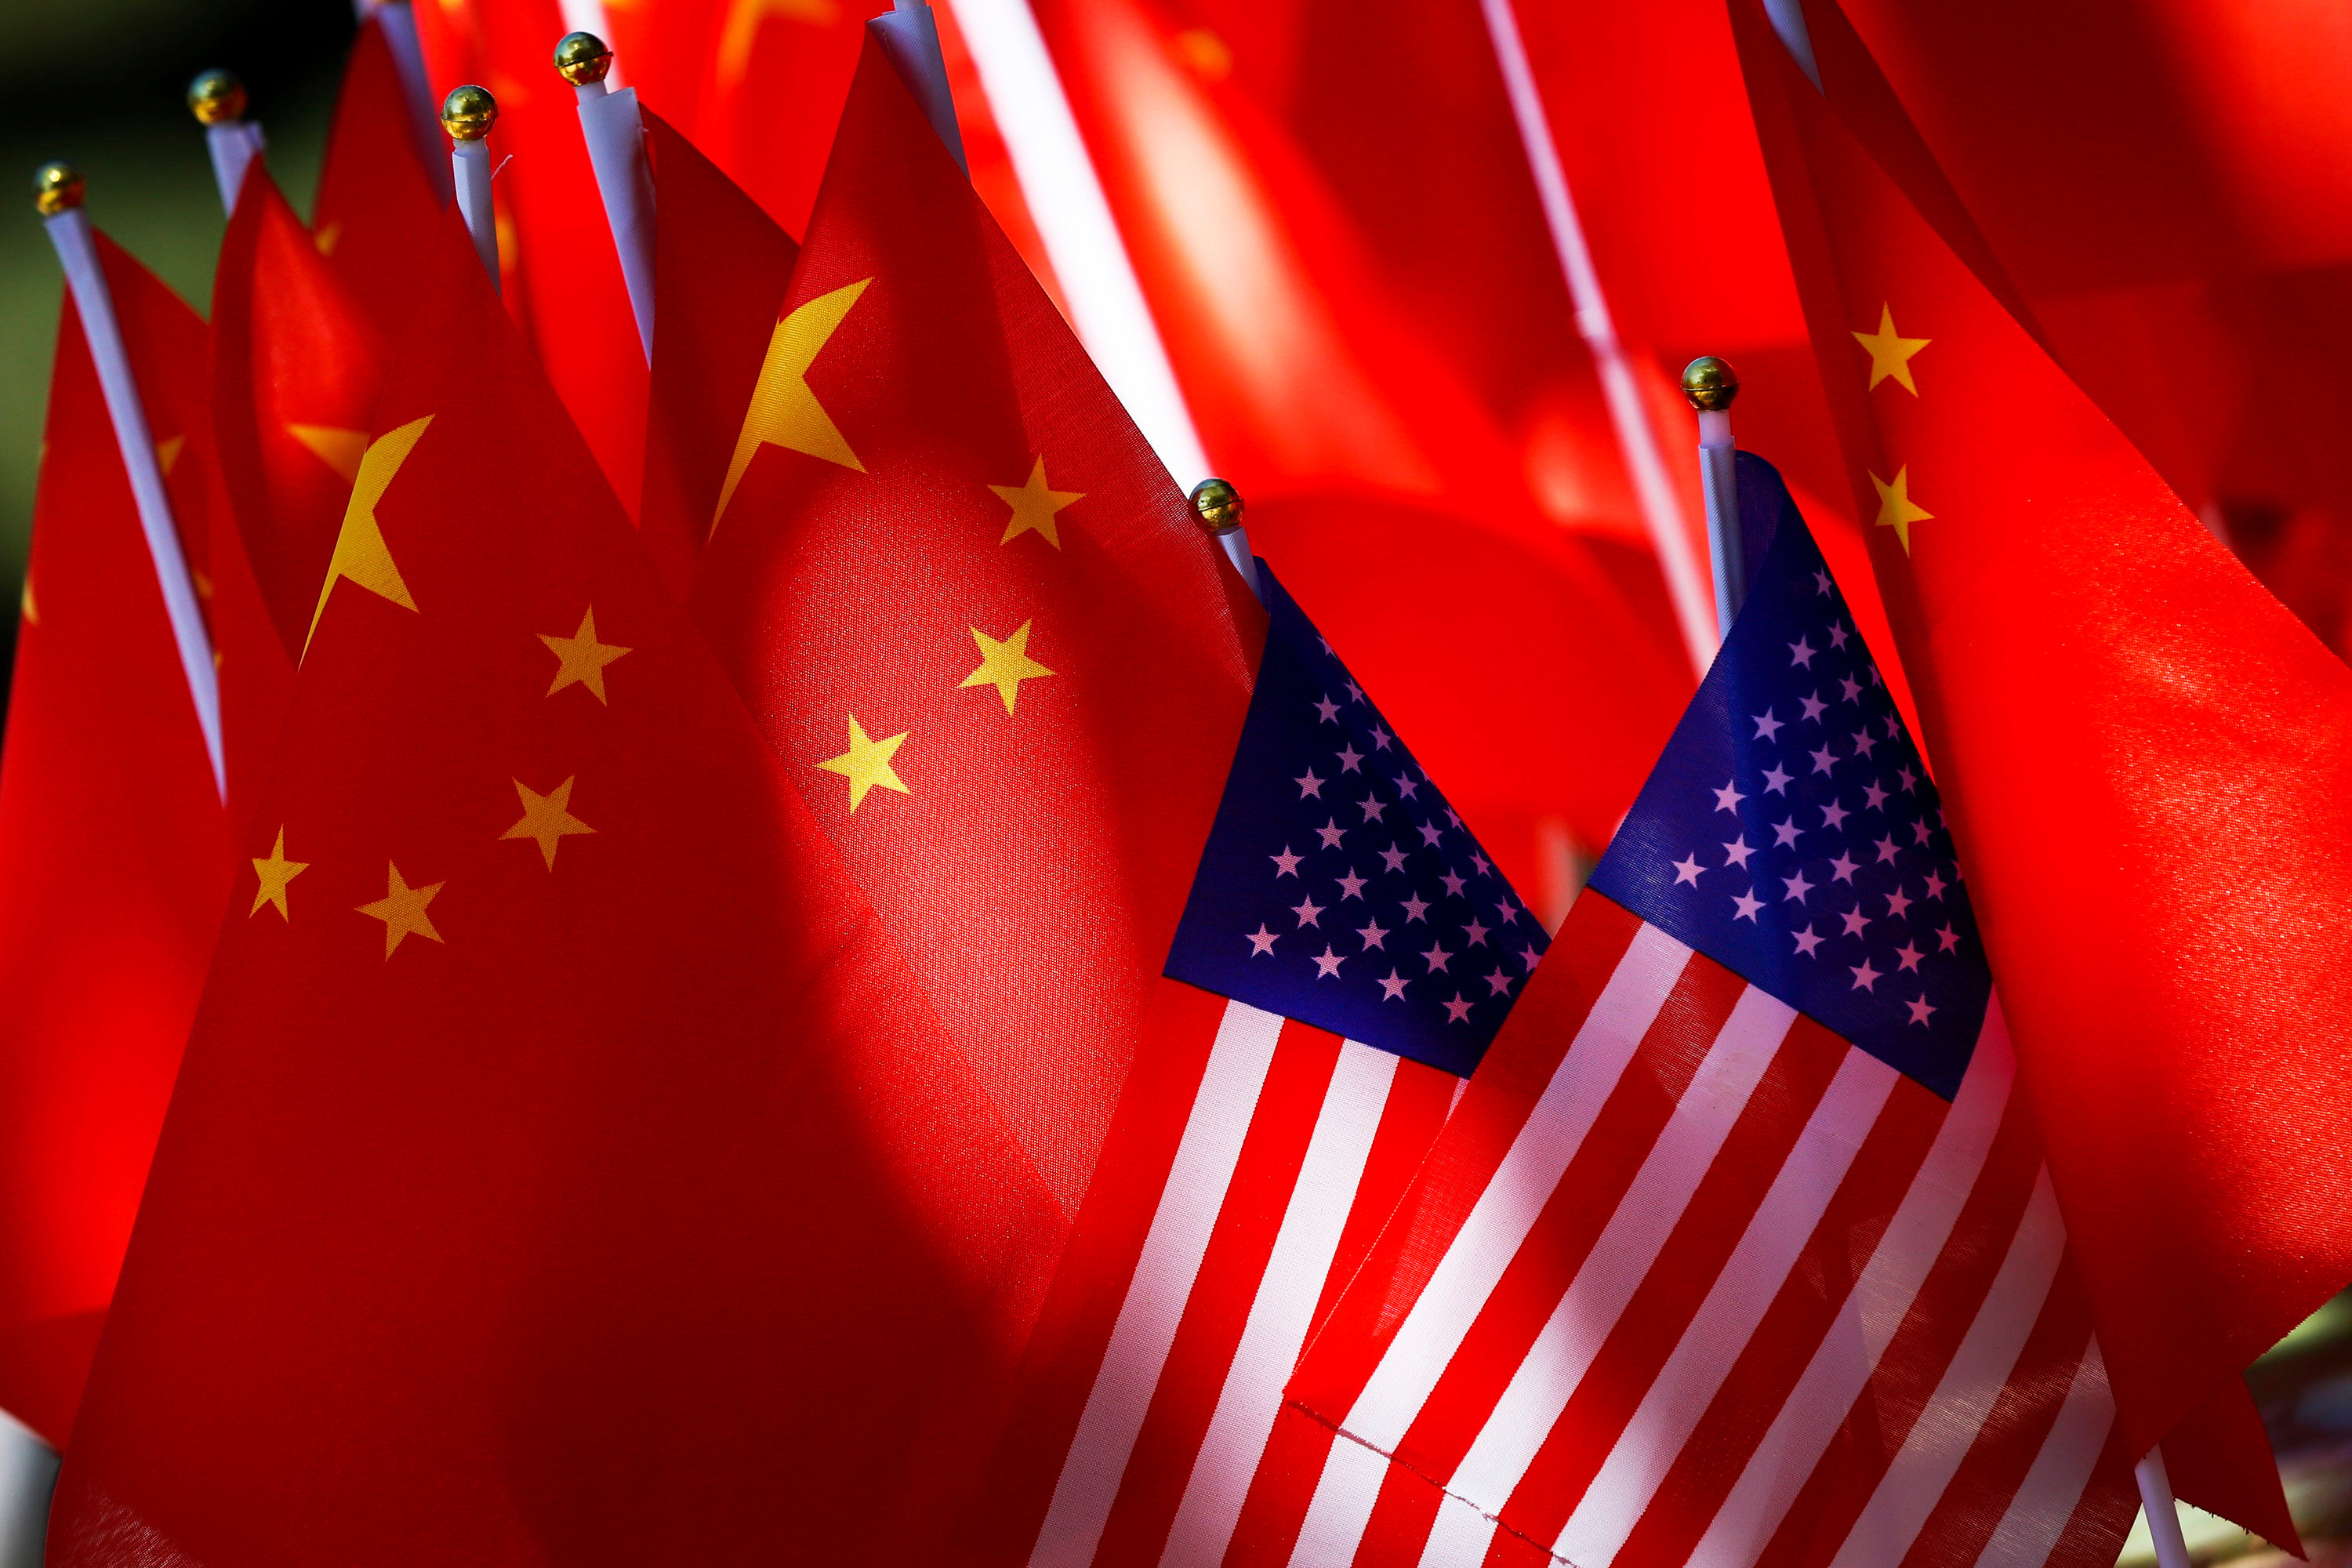 The flags of China and the United States are displayed together in Beijing on September 16, 2018. Photo: AP